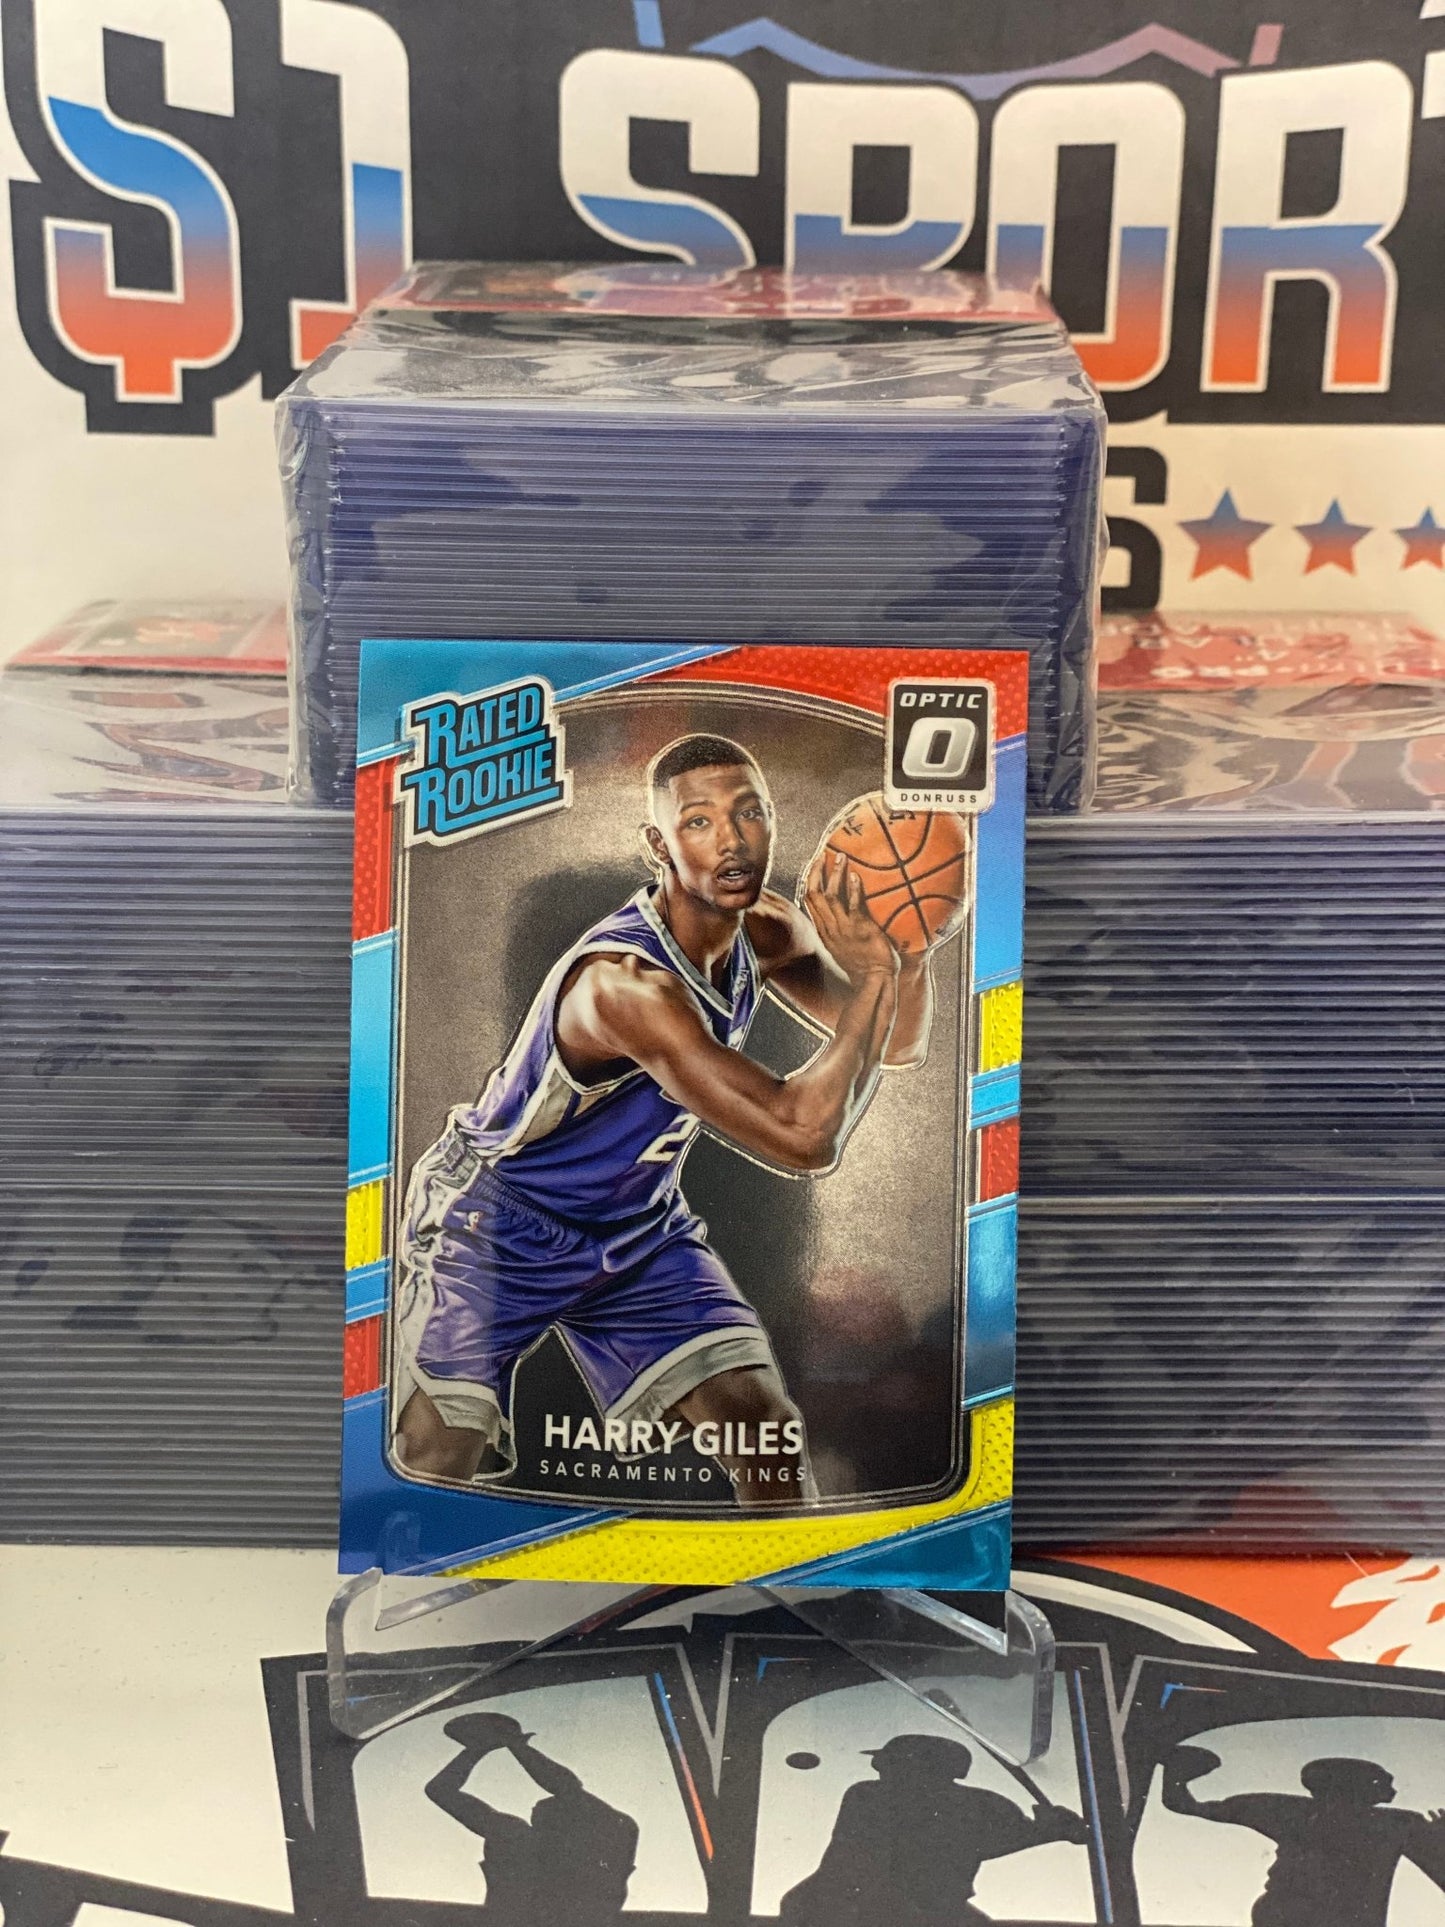 2017 Donruss Optic (Mega Yellow Red, Rated Rookie) Harry Giles #181